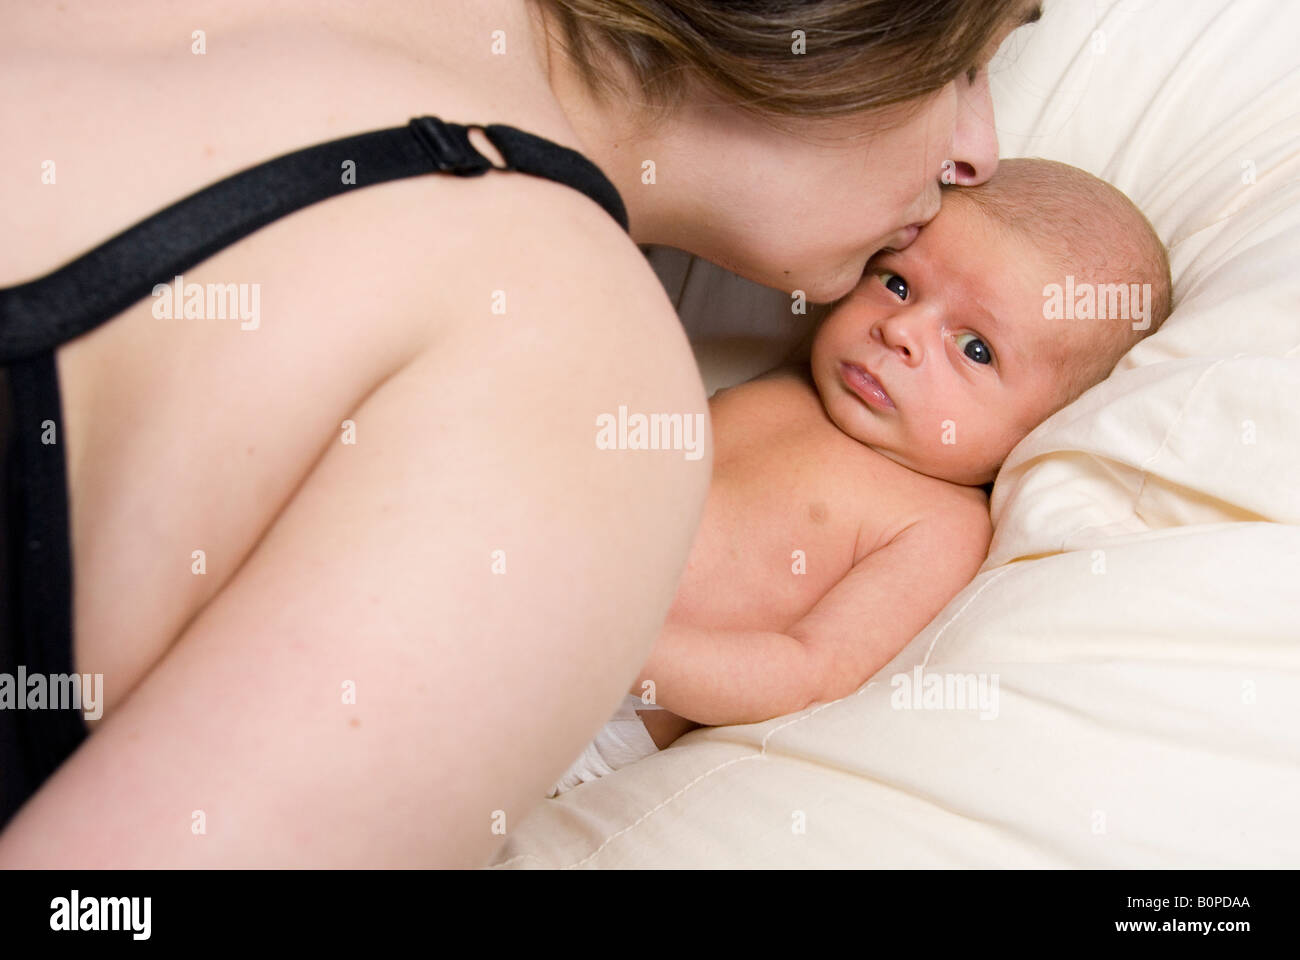 Newborn Baby Boy Joshua Kailas Hudson Aged 20 days Lying in Beanbag Being Kissed by Mother Deborah Waters Stock Photo